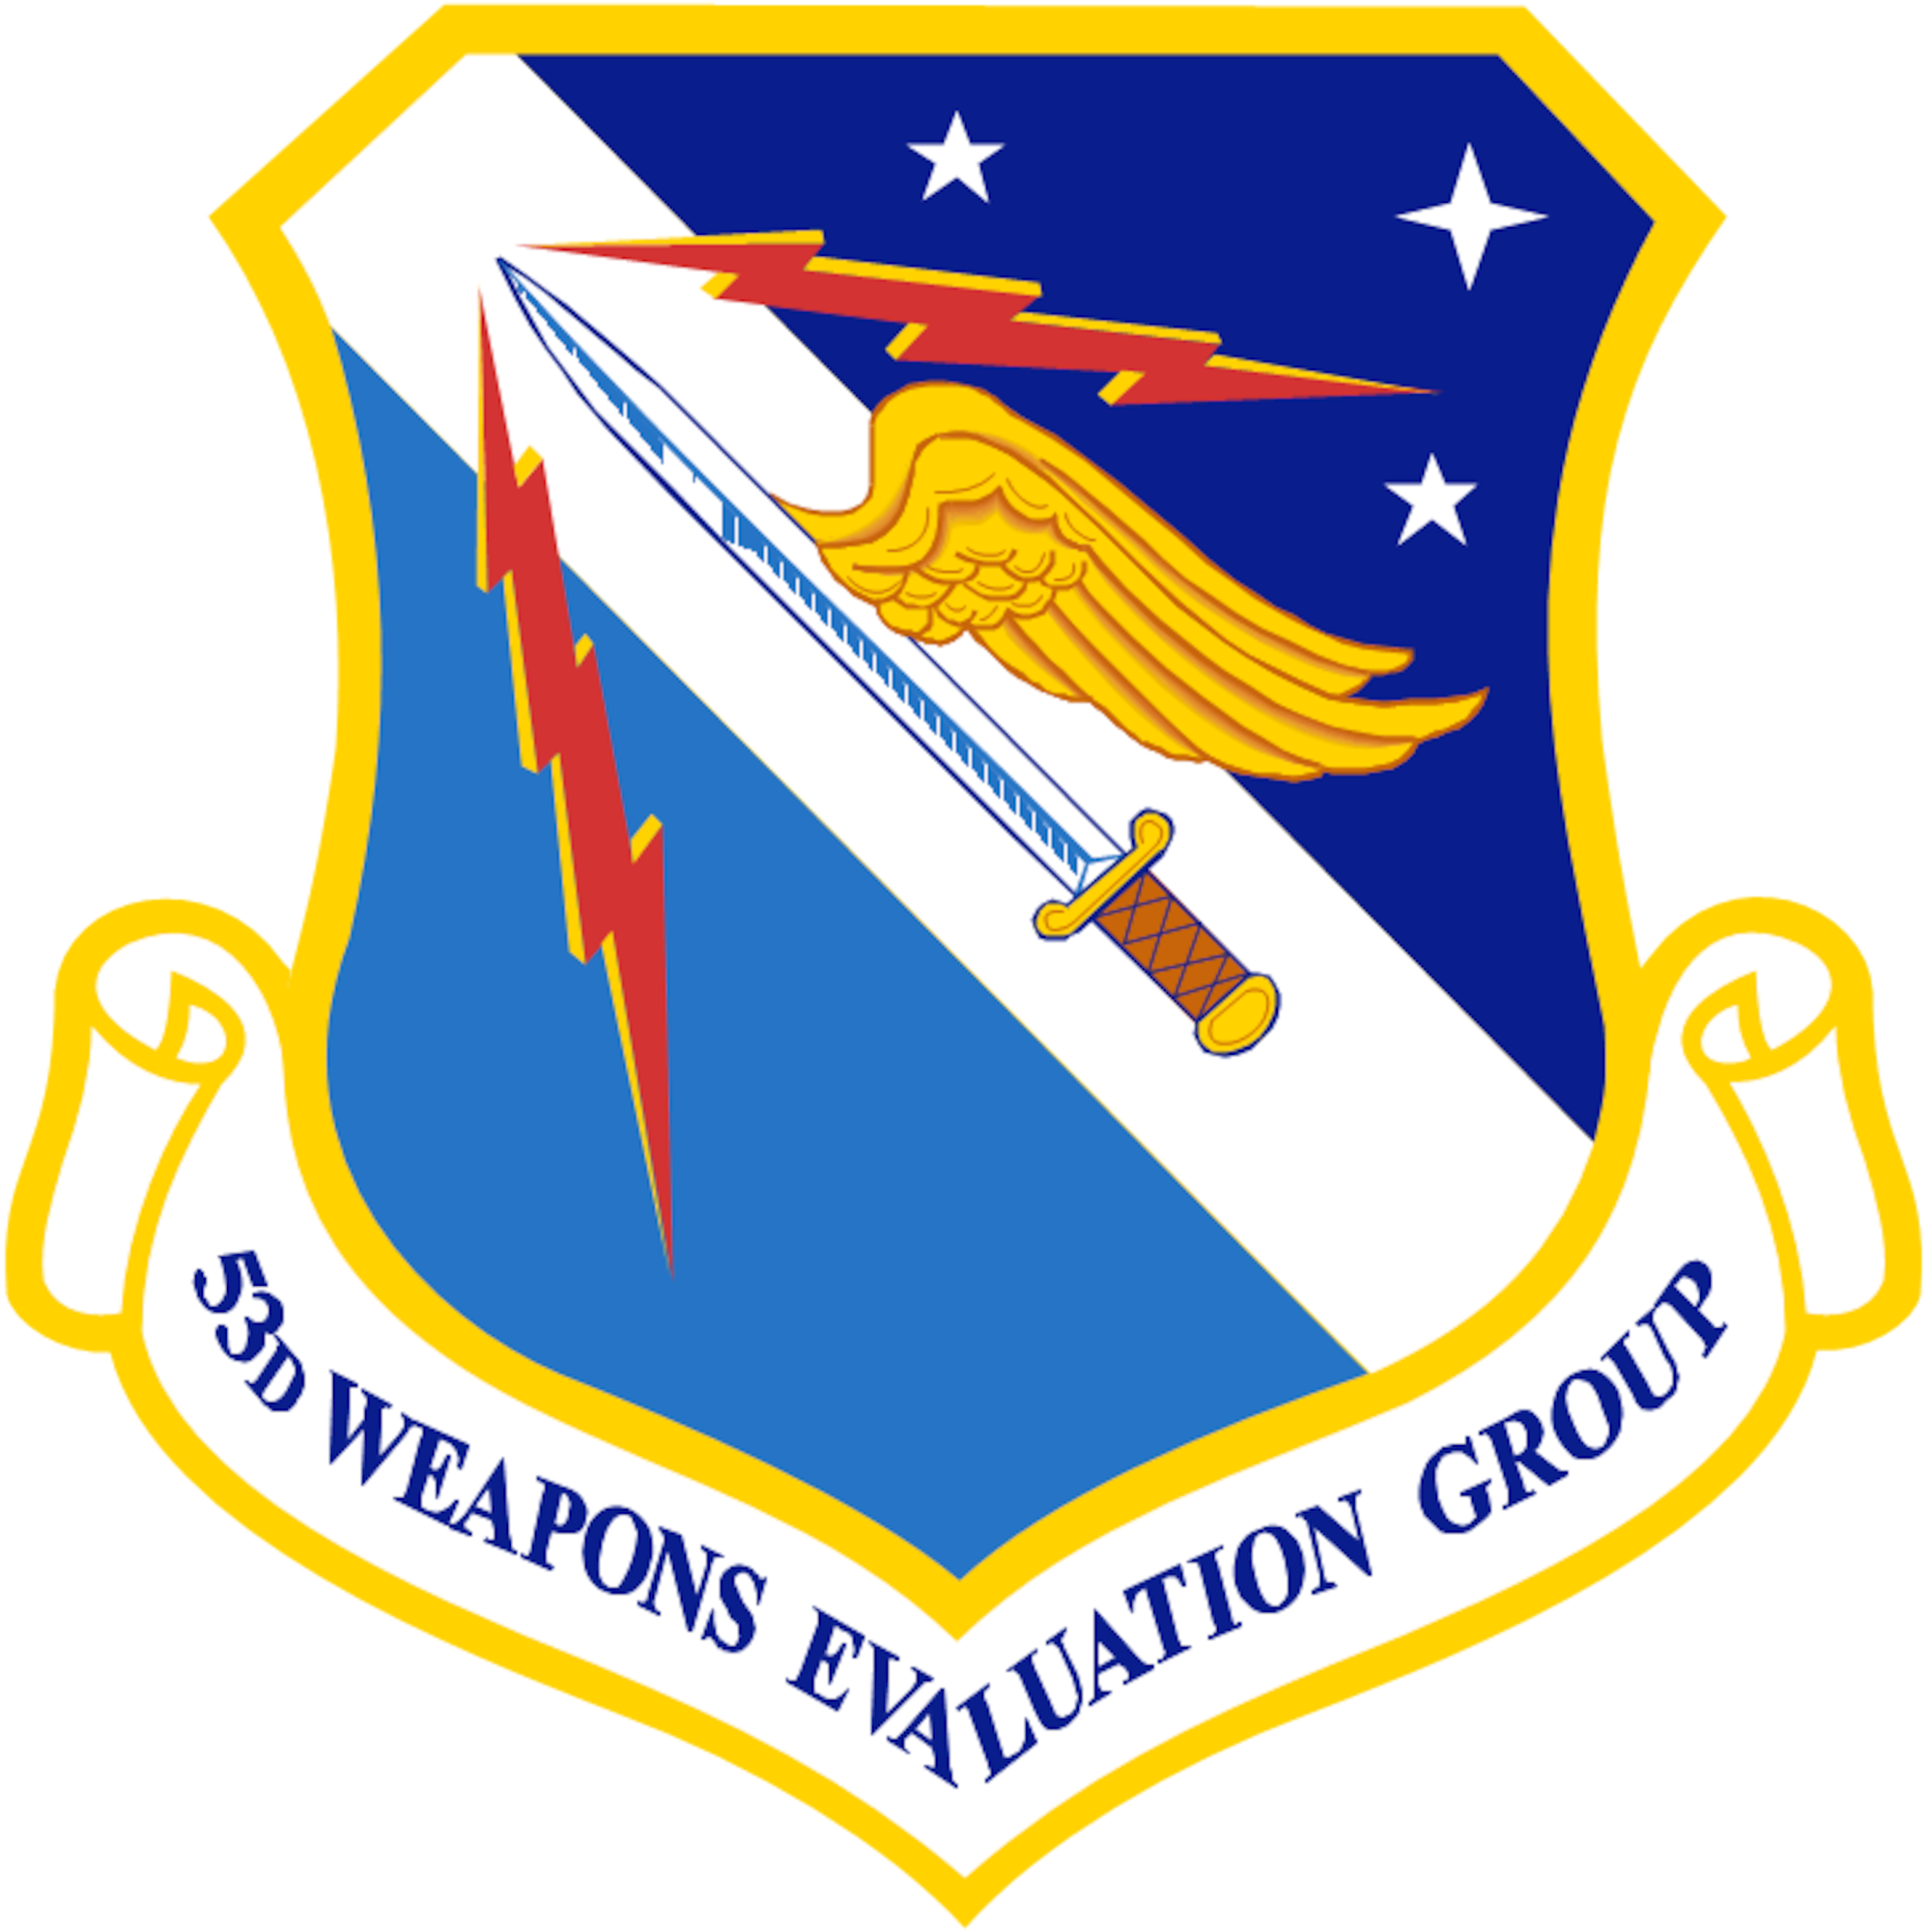 Patch for 53rd Weapons Evaluation group